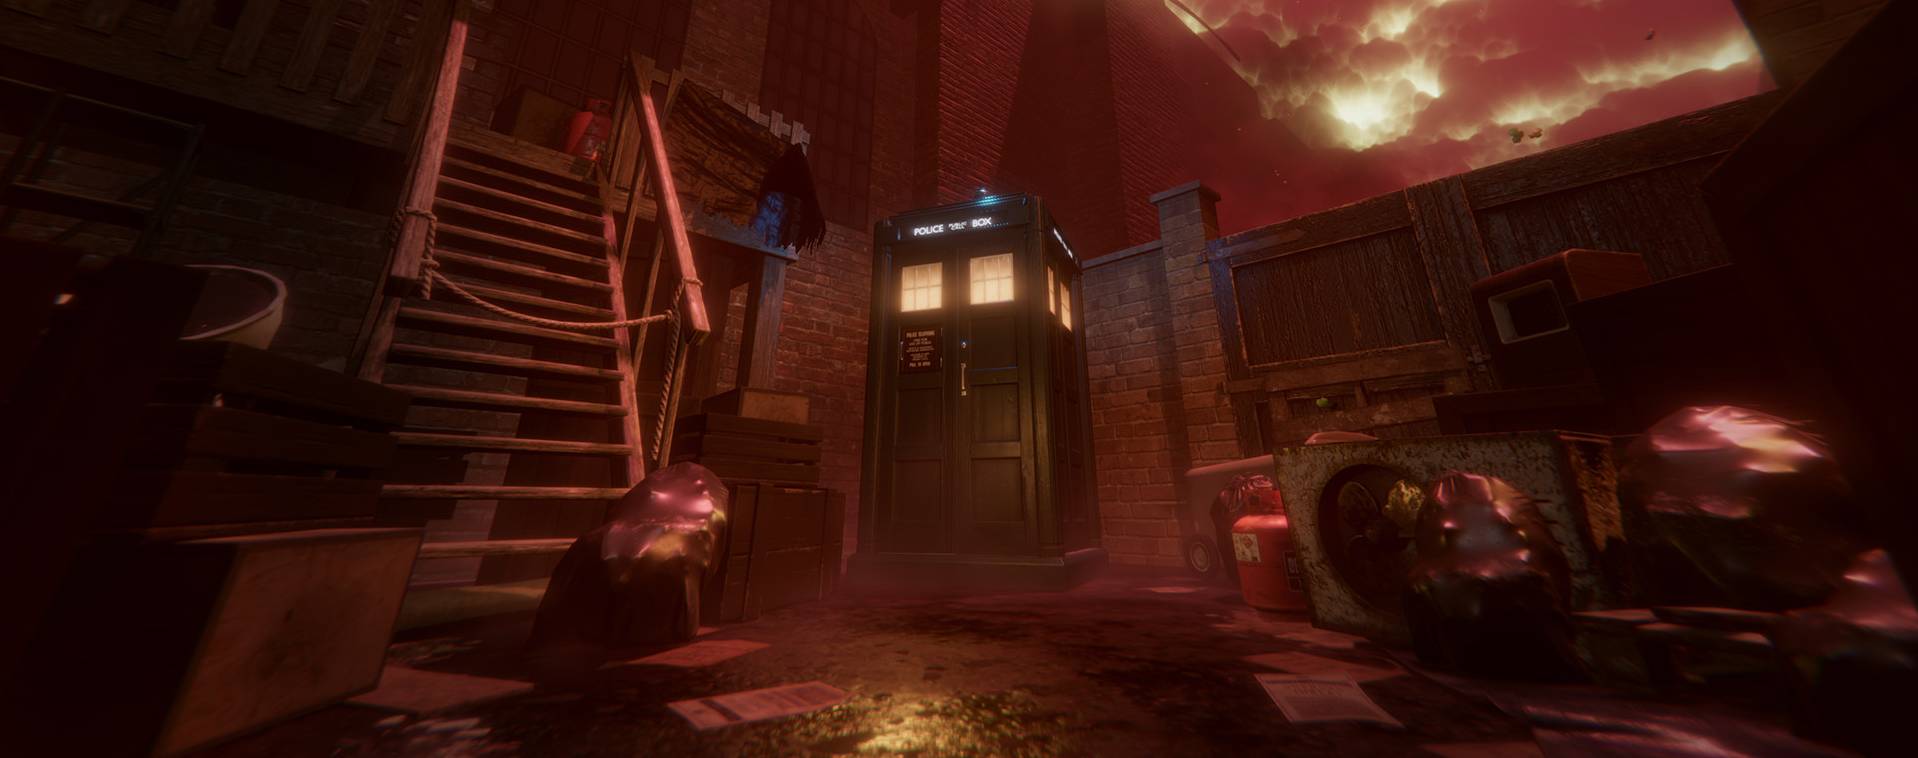 Doctor Who: The Edge Of Time VR Adventure Game Launches This November